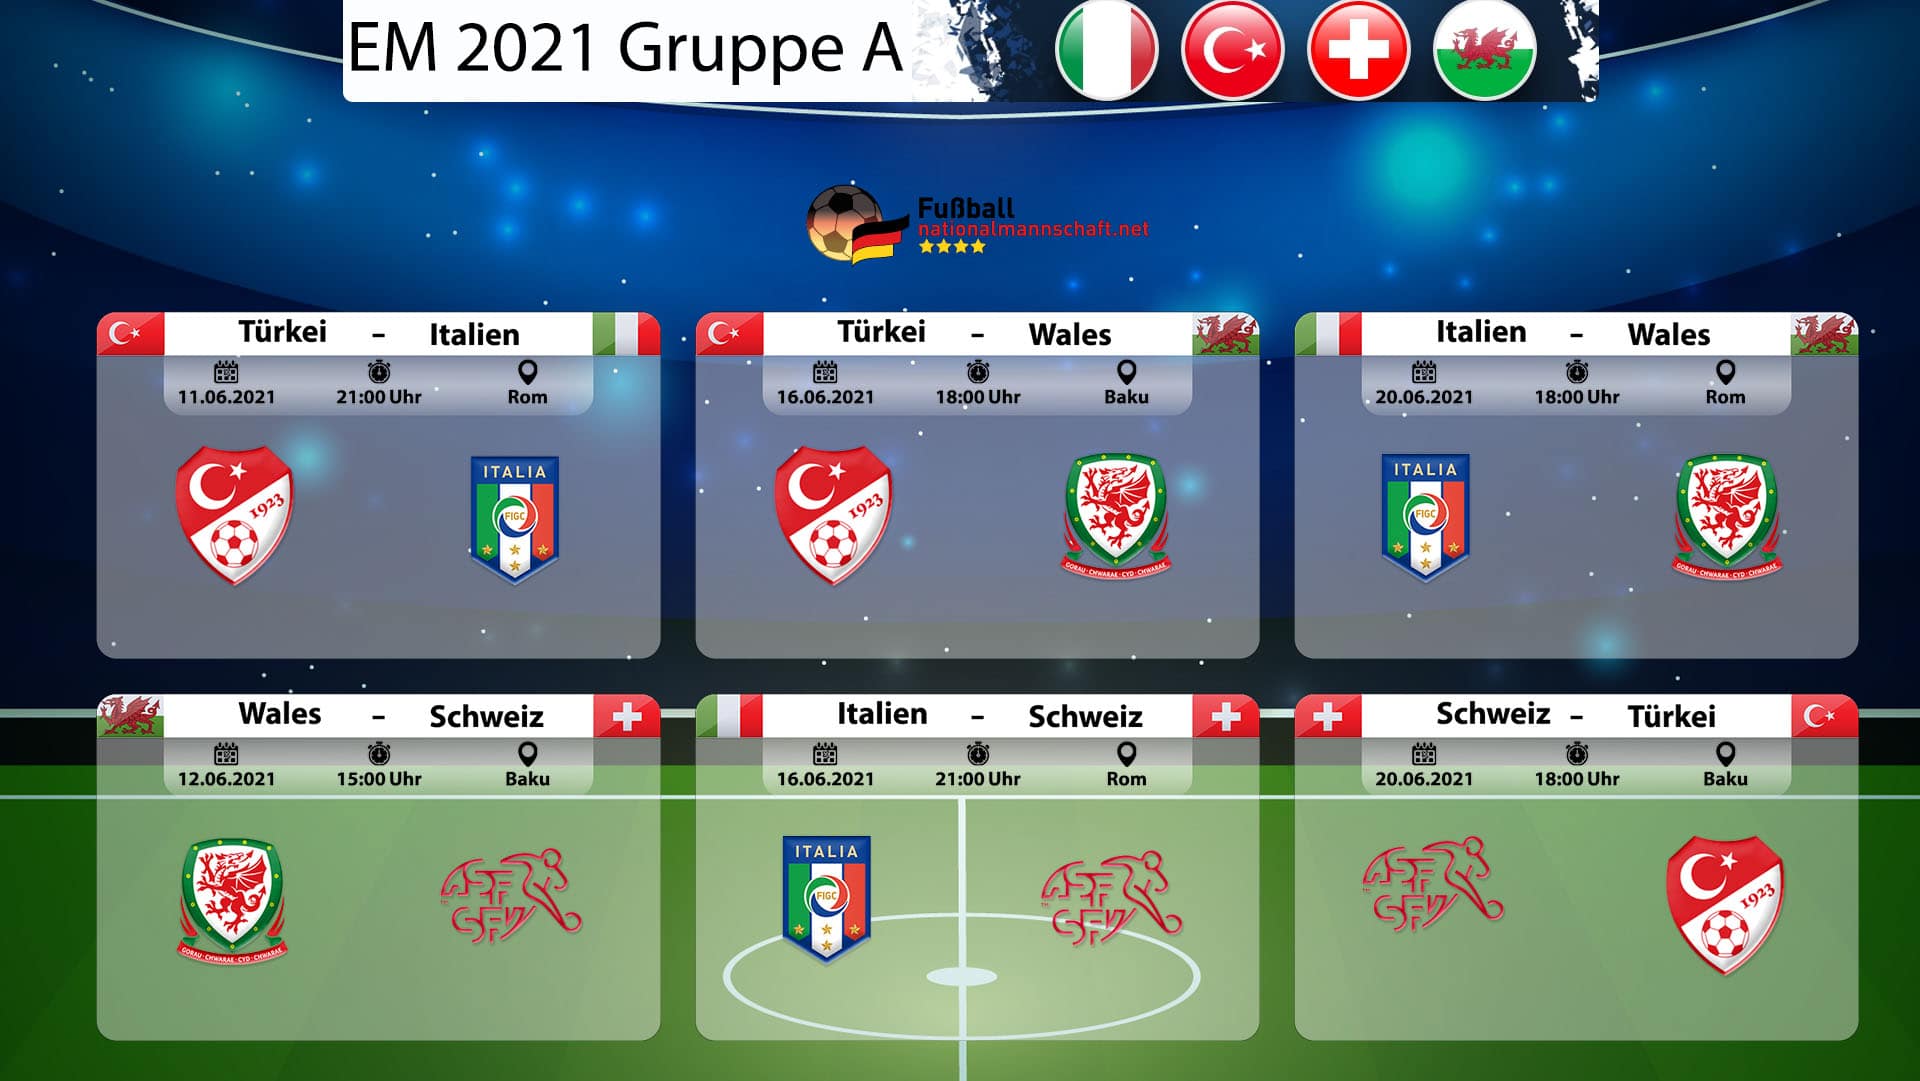 EM 2020/2021 Gruppe A Tabelle and Spielplan